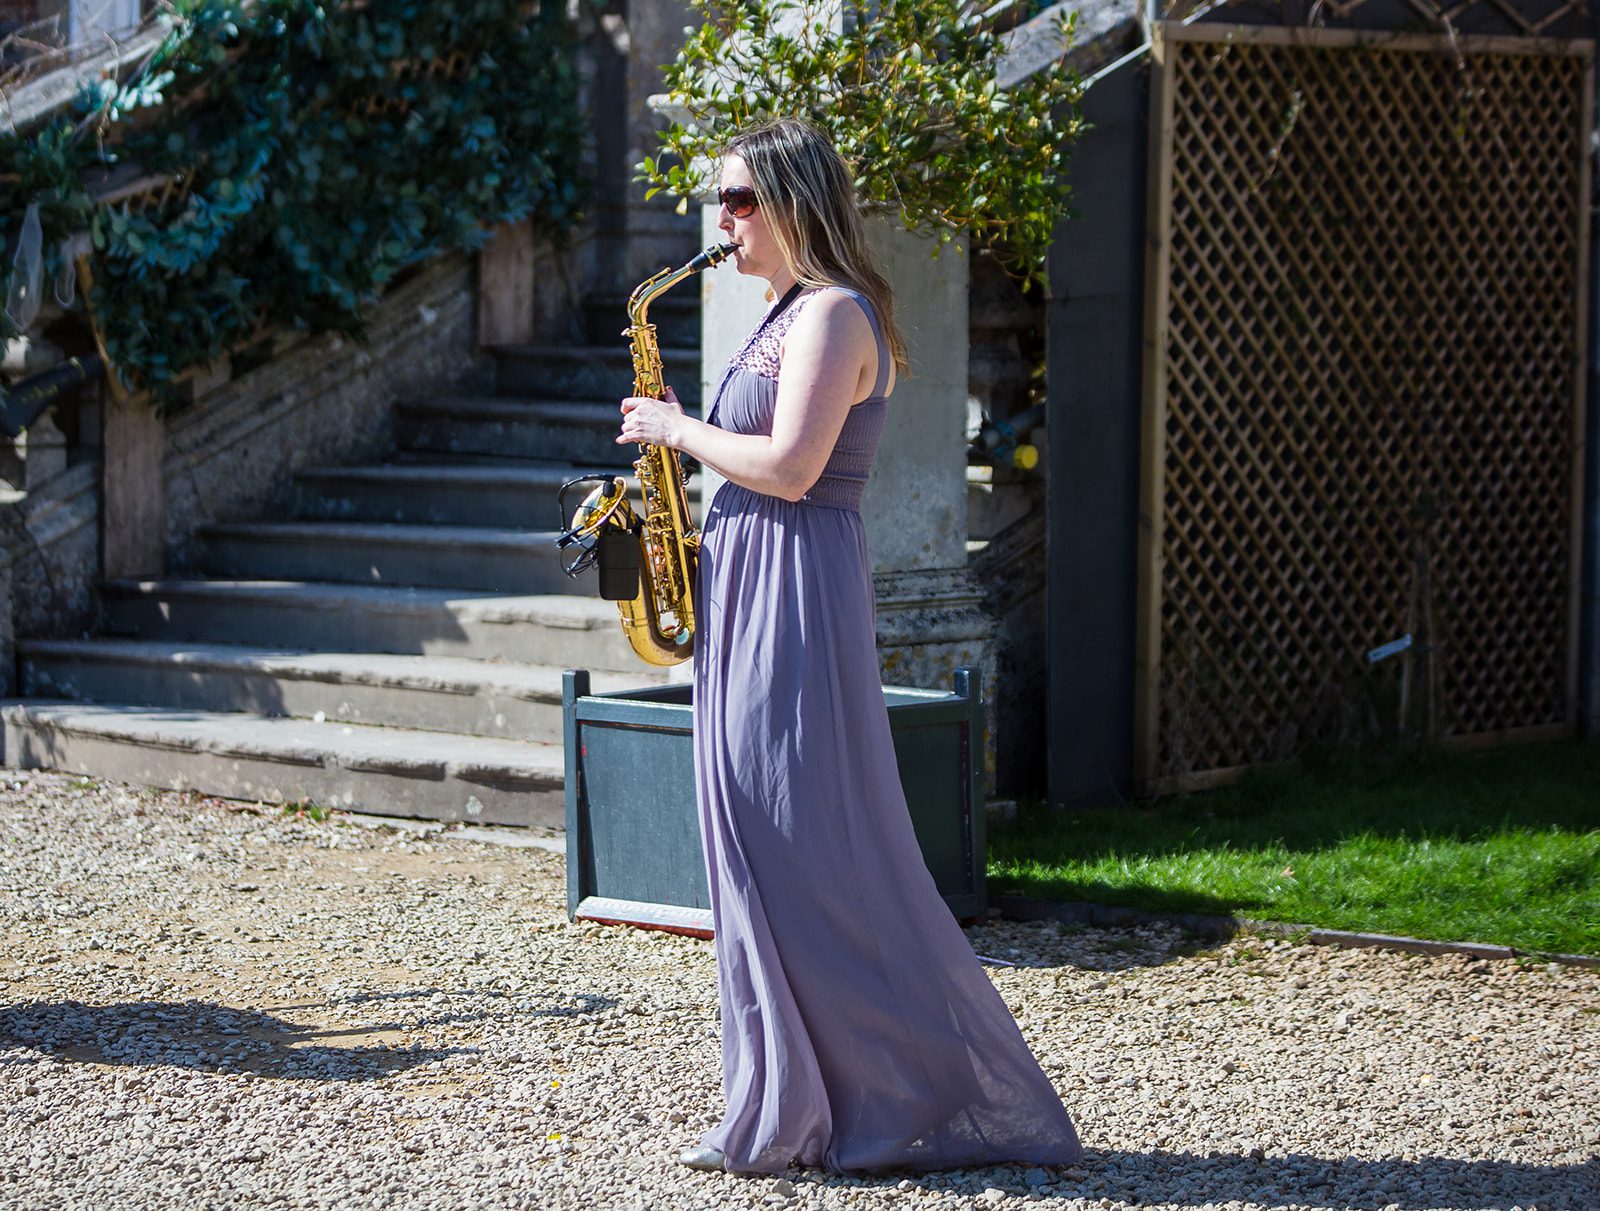 This image depicts a woman in a long dress playing a saxophone at a wedding reception.